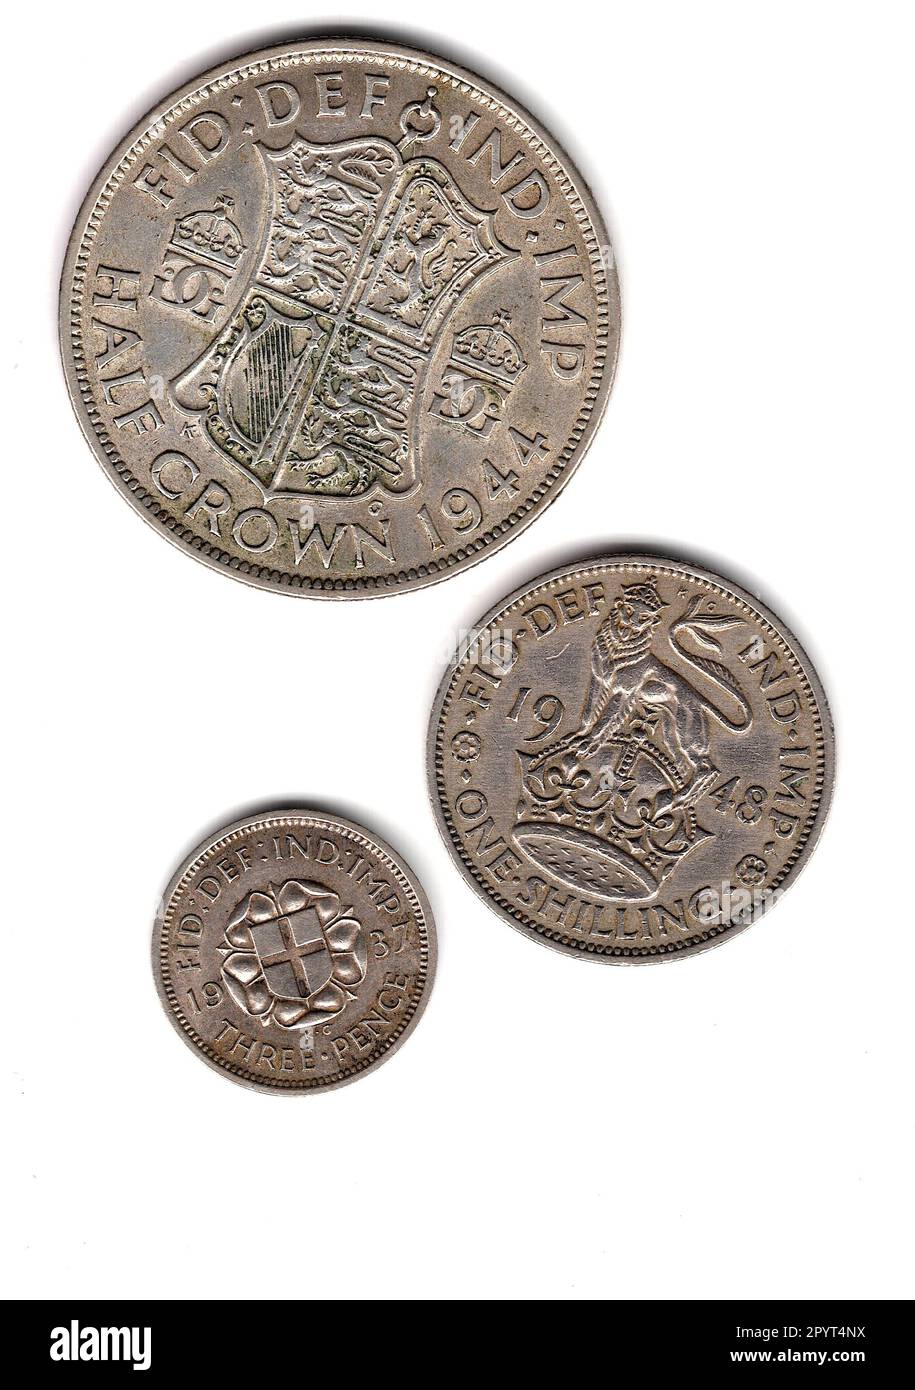 King George VI vintage silver coins from Great Britain showing the reverse. Stock Photo